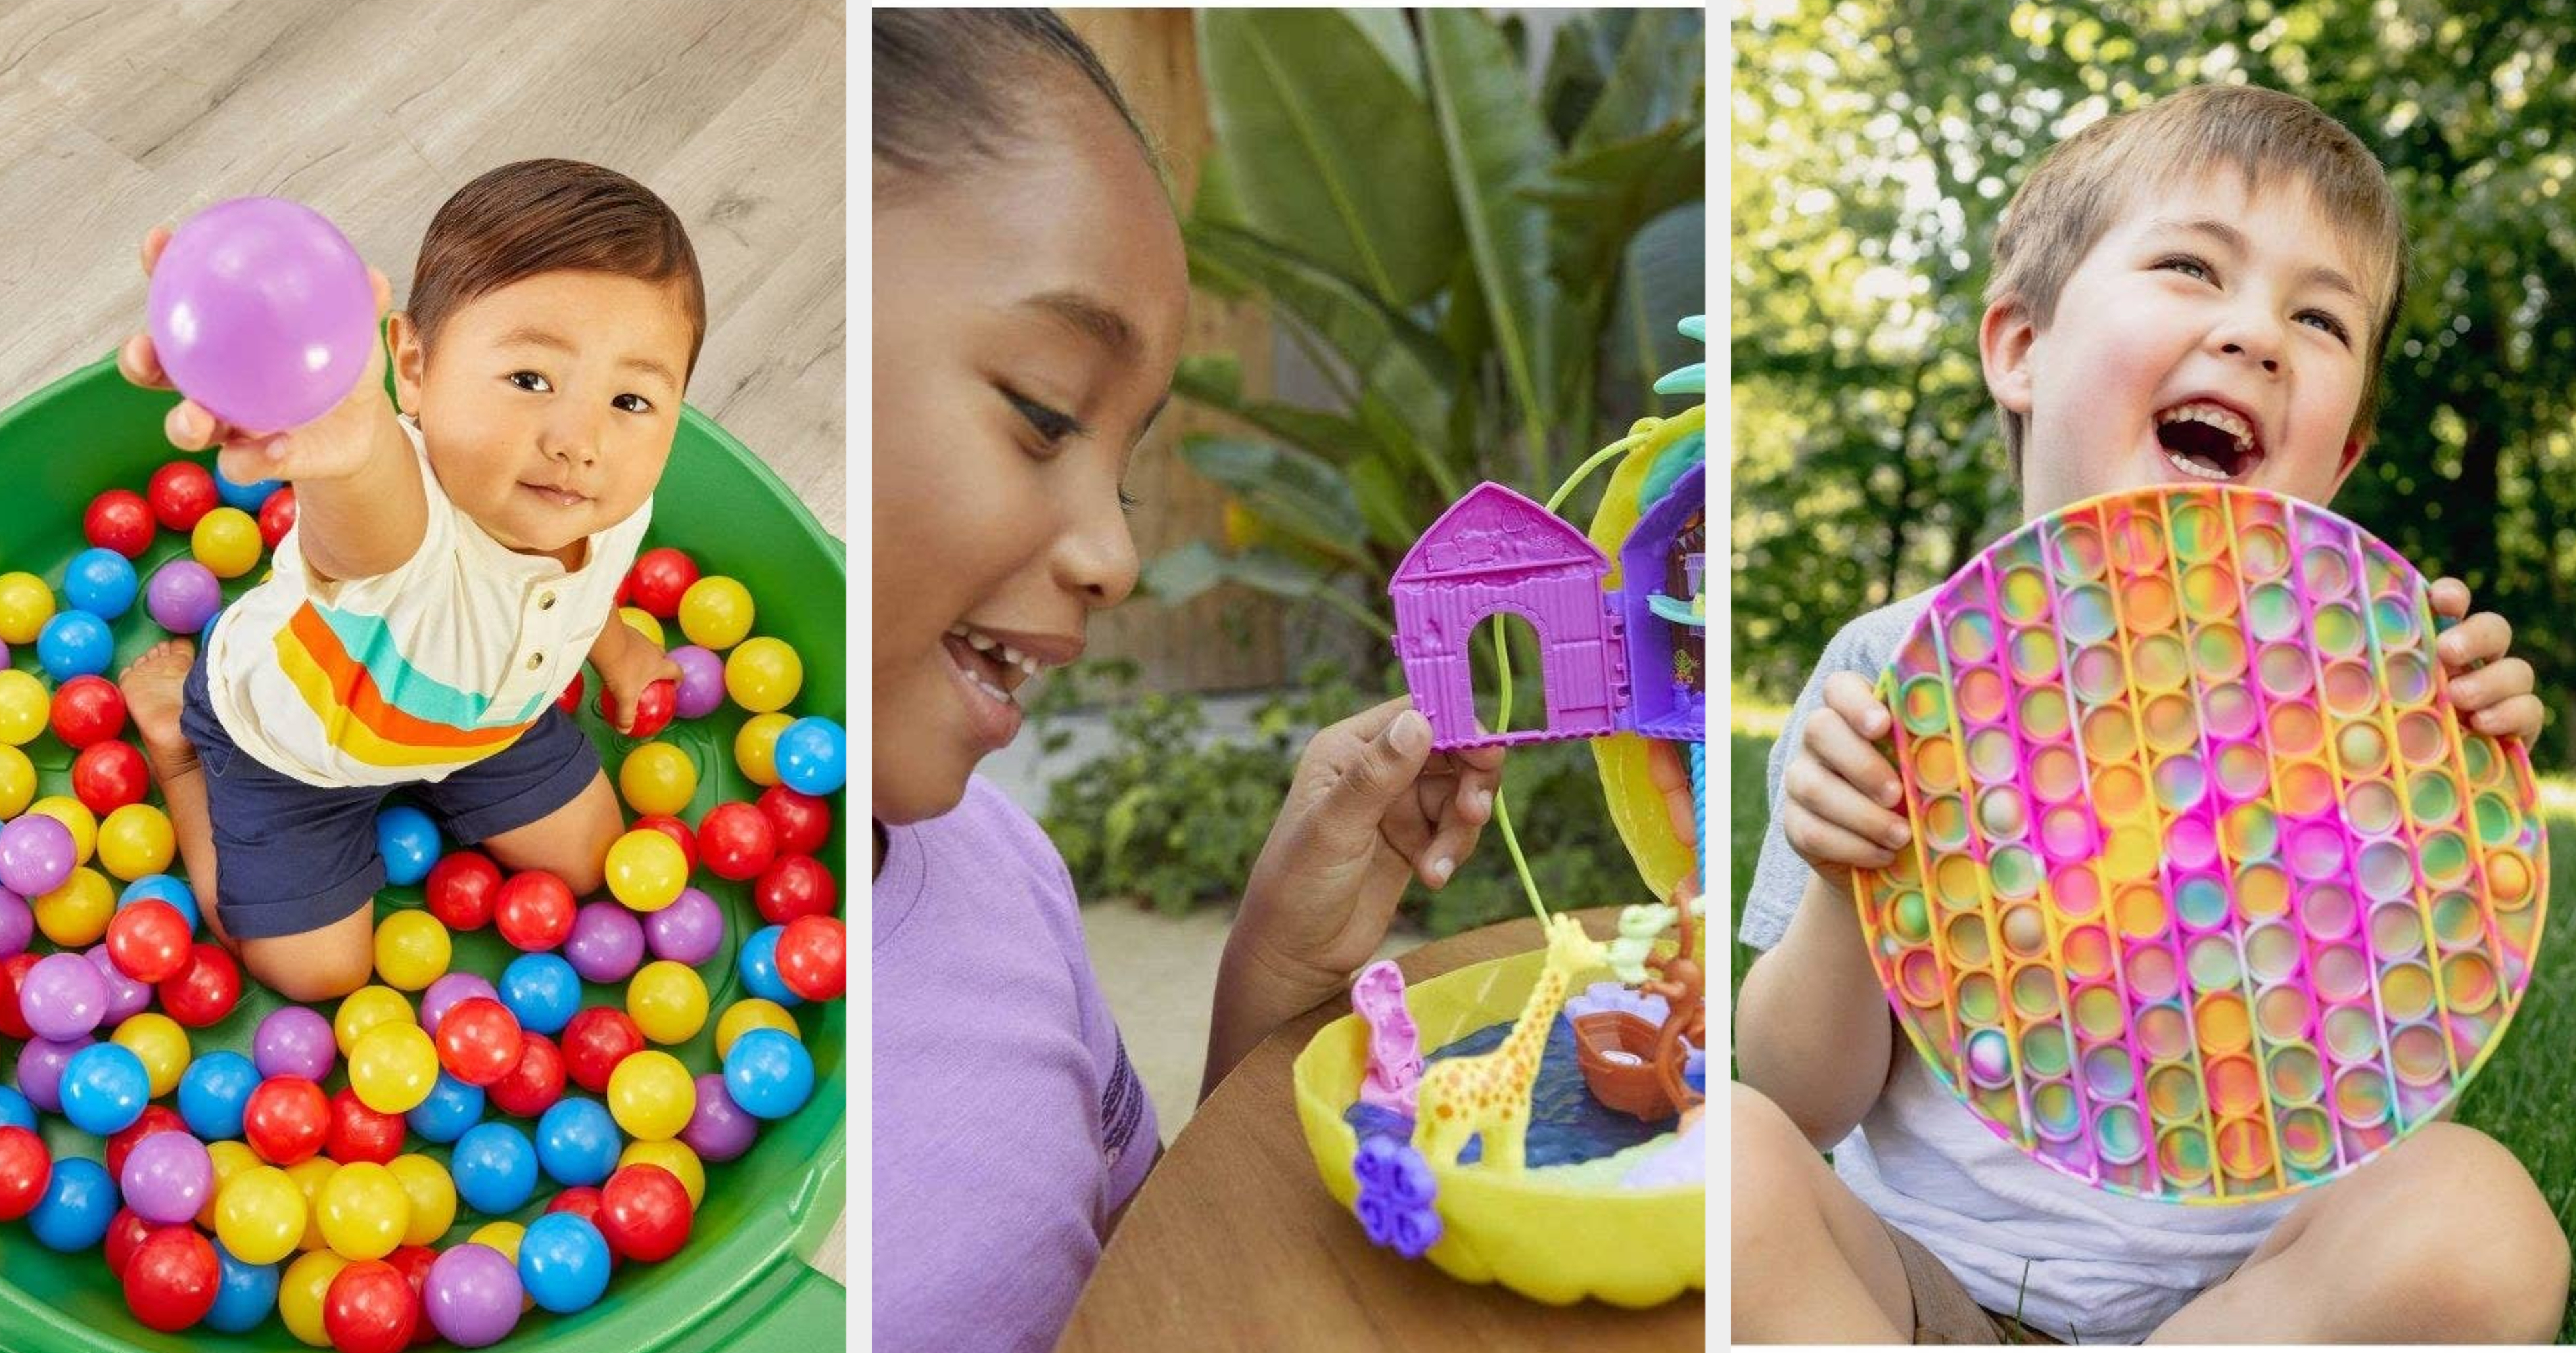 100 Household Items You Can Use For Fun Kids' Activities - KidMinds